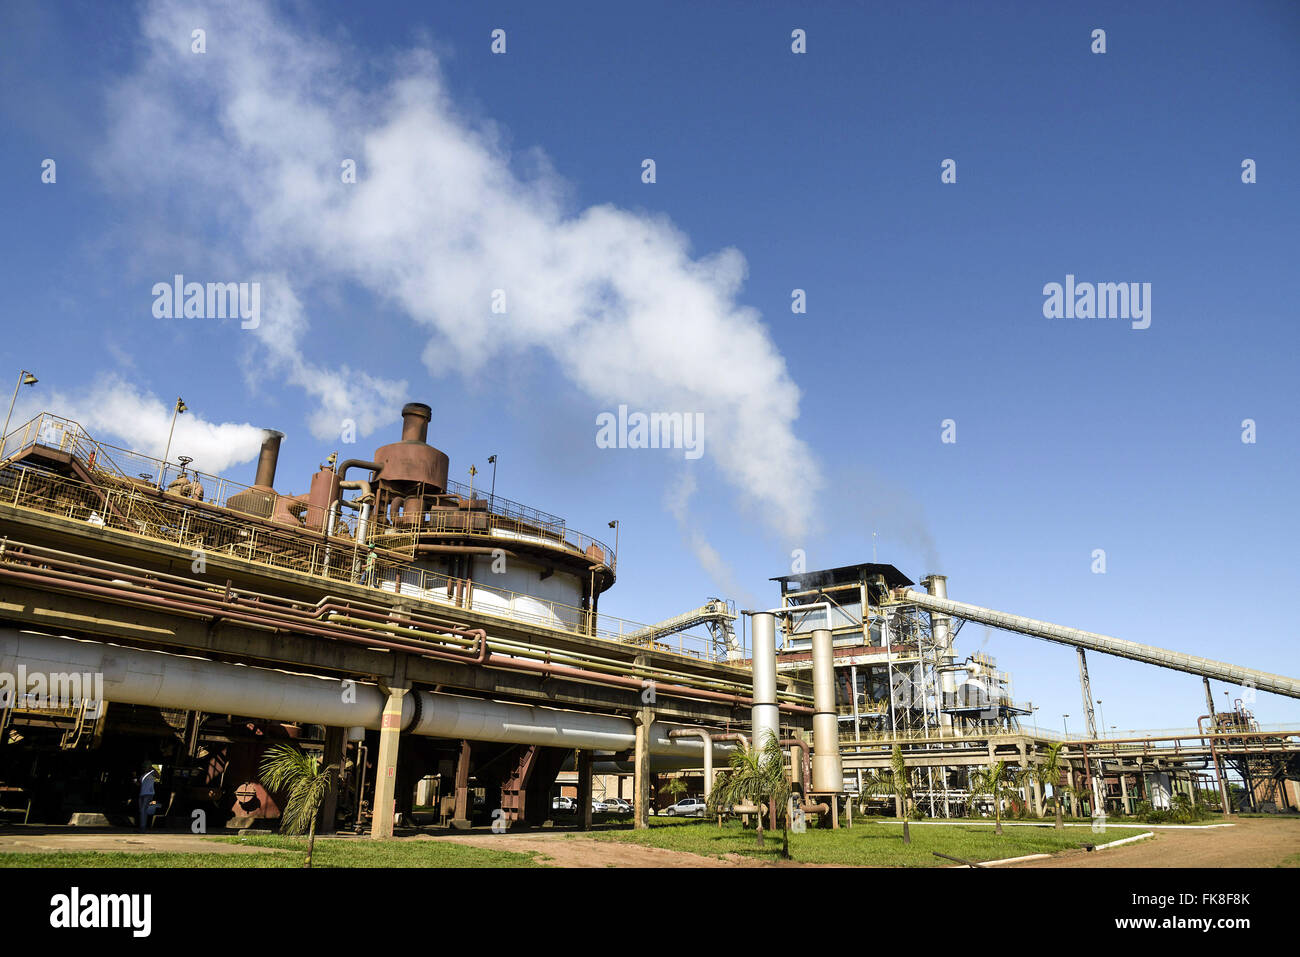 Smoke released by the fireplace for processing of sugarcane in plant Stock Photo